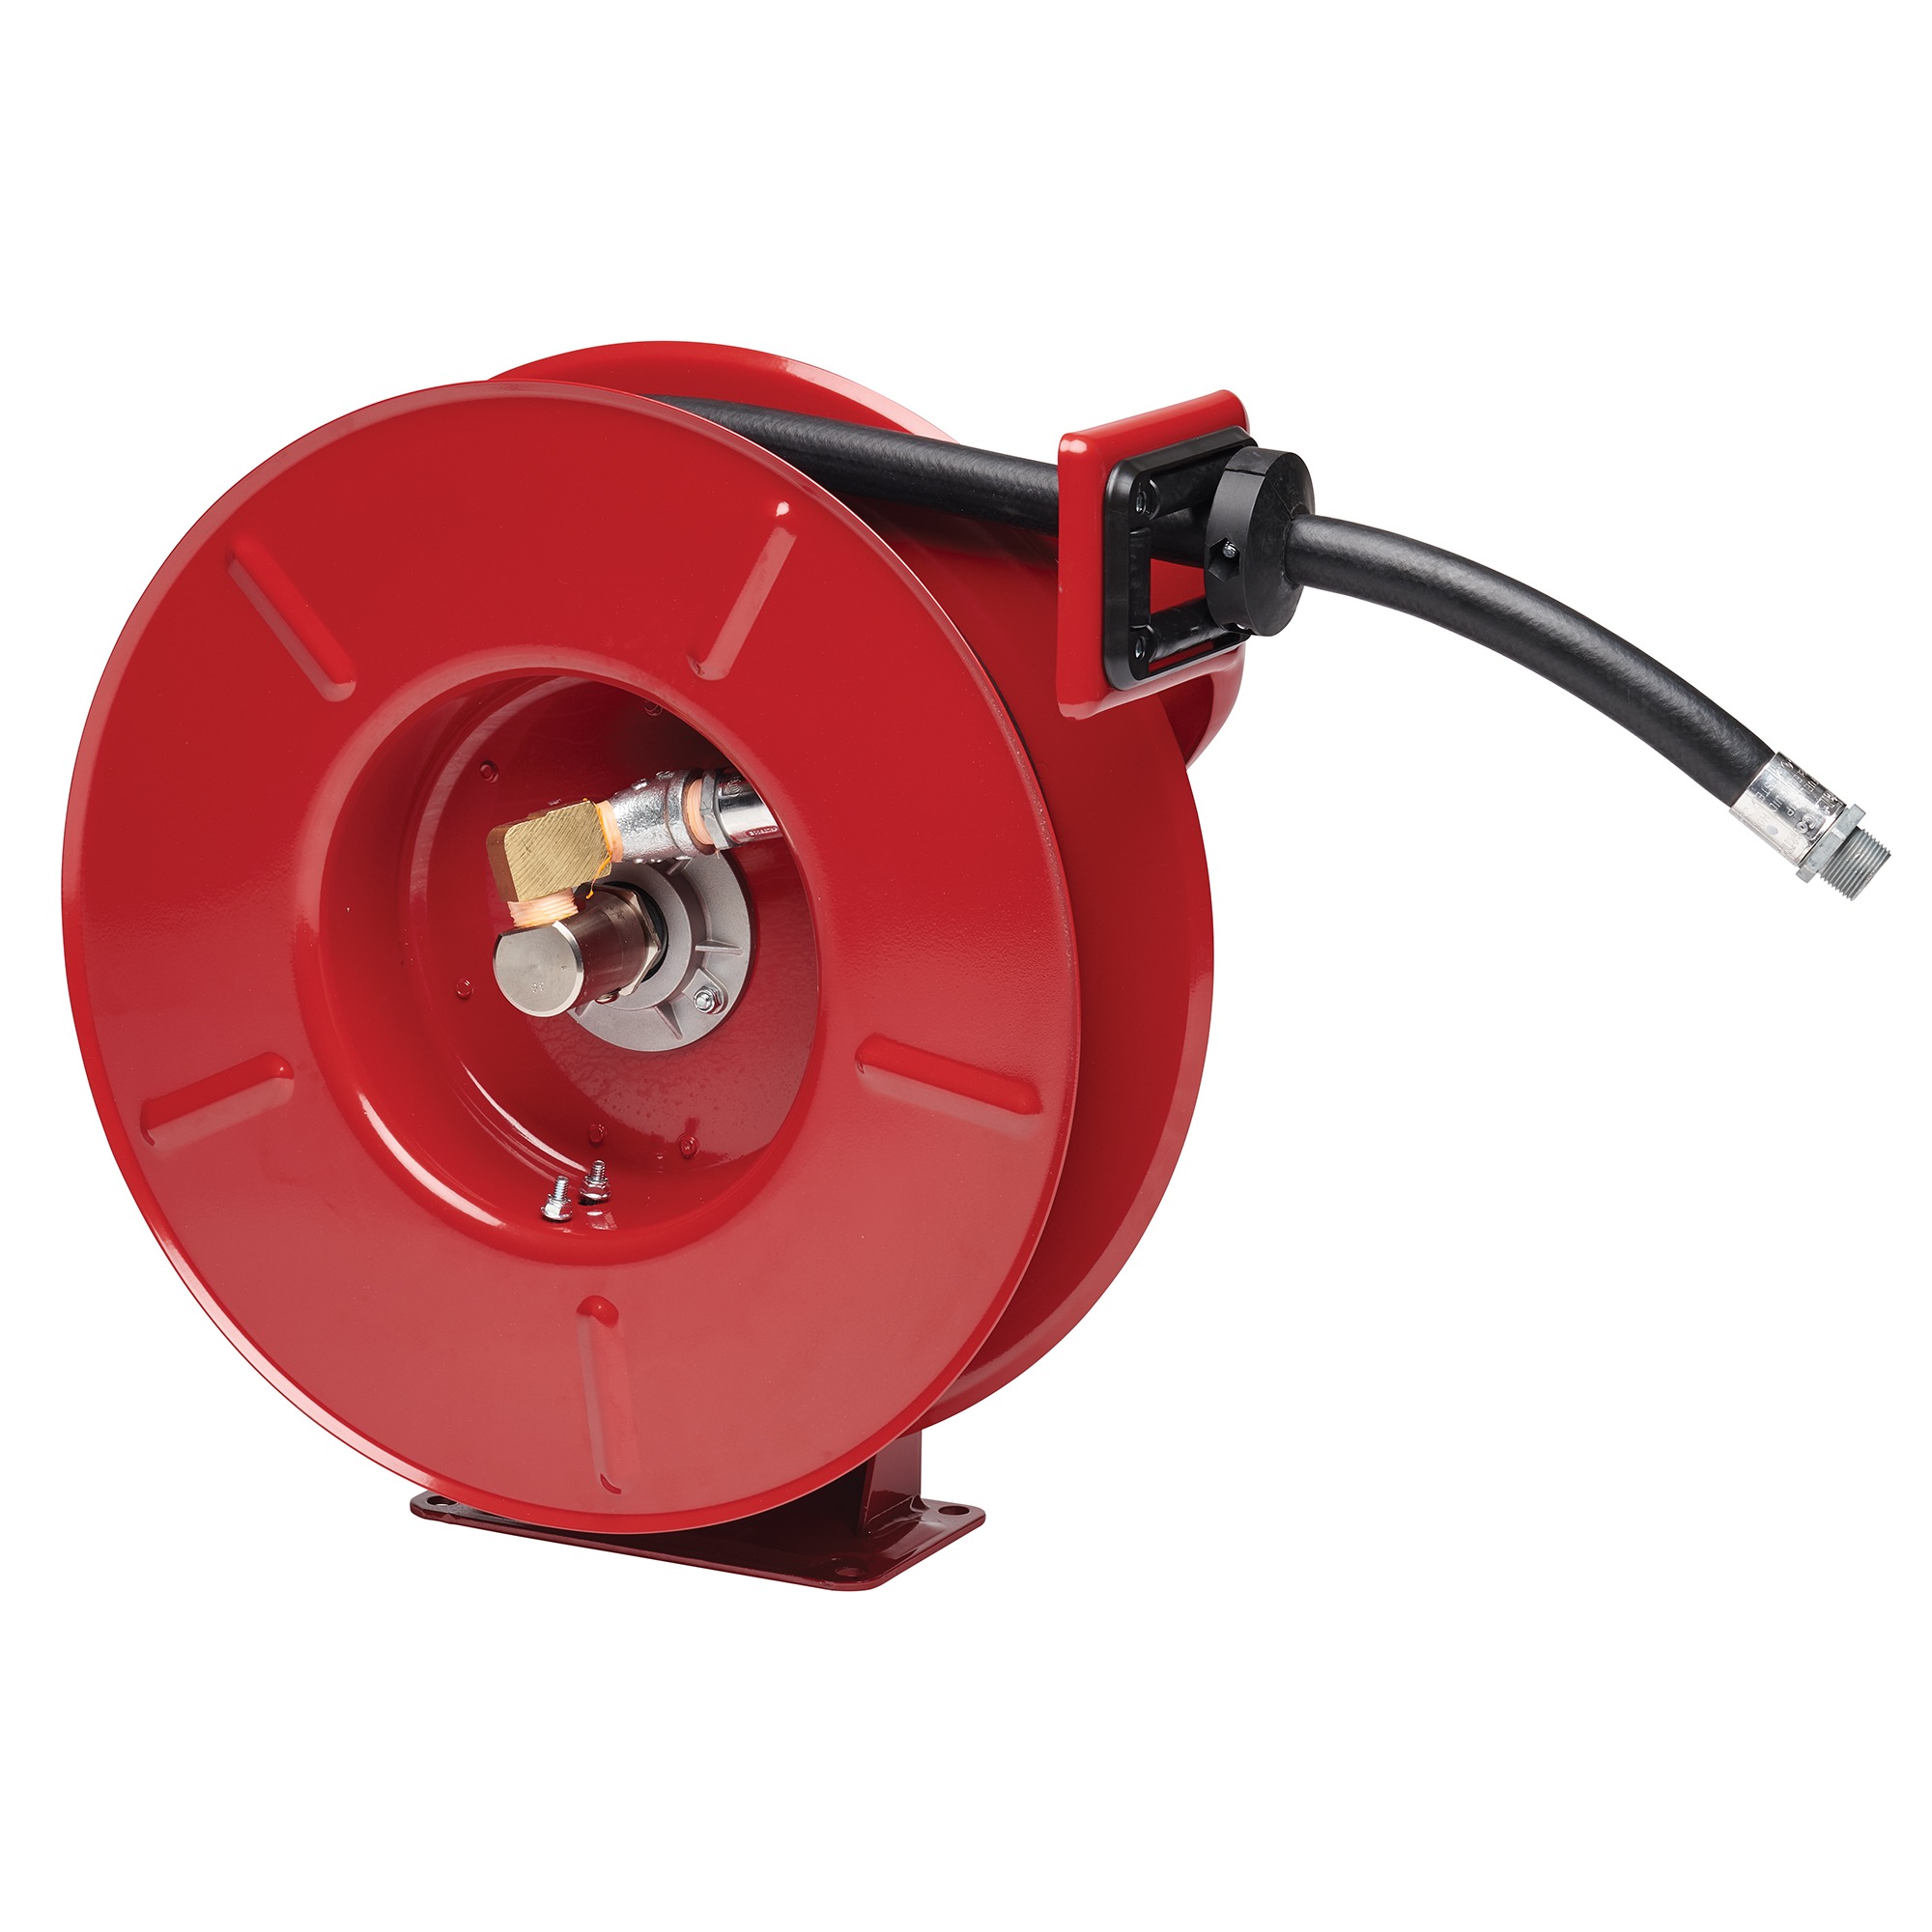 Please see replacement item# 28811. Reelworks Fuel Oil Hose Reel and Hose —  3/4in. x 25ft.